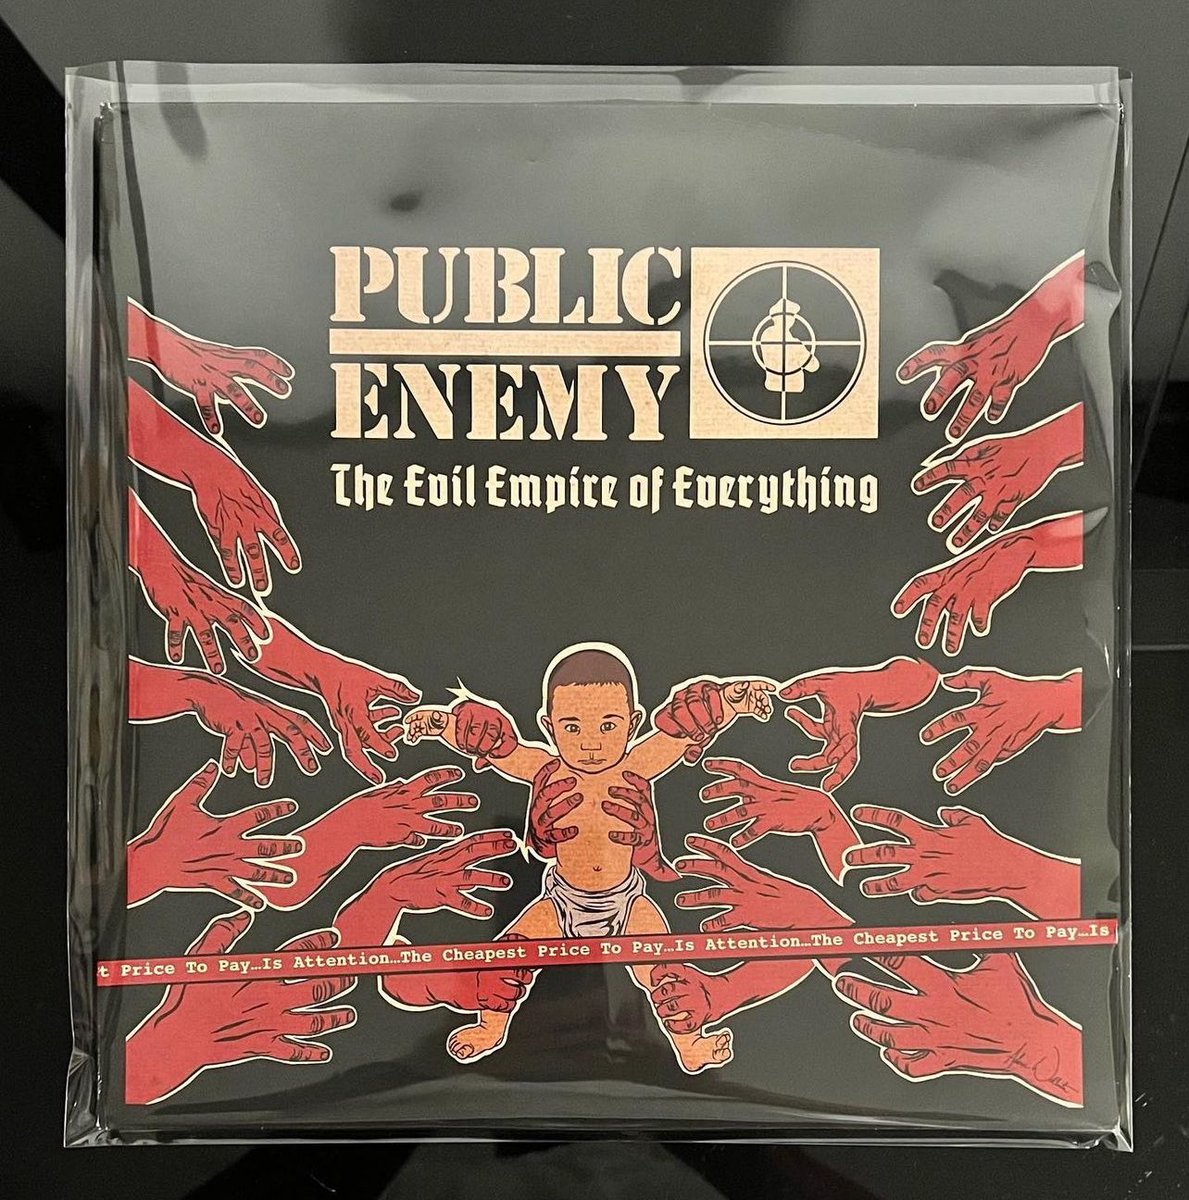 Public Enemy The Evil Empire of Everything 2012 Original Press Released 11 years ago today @MrChuckD @PublicEnemyFTP